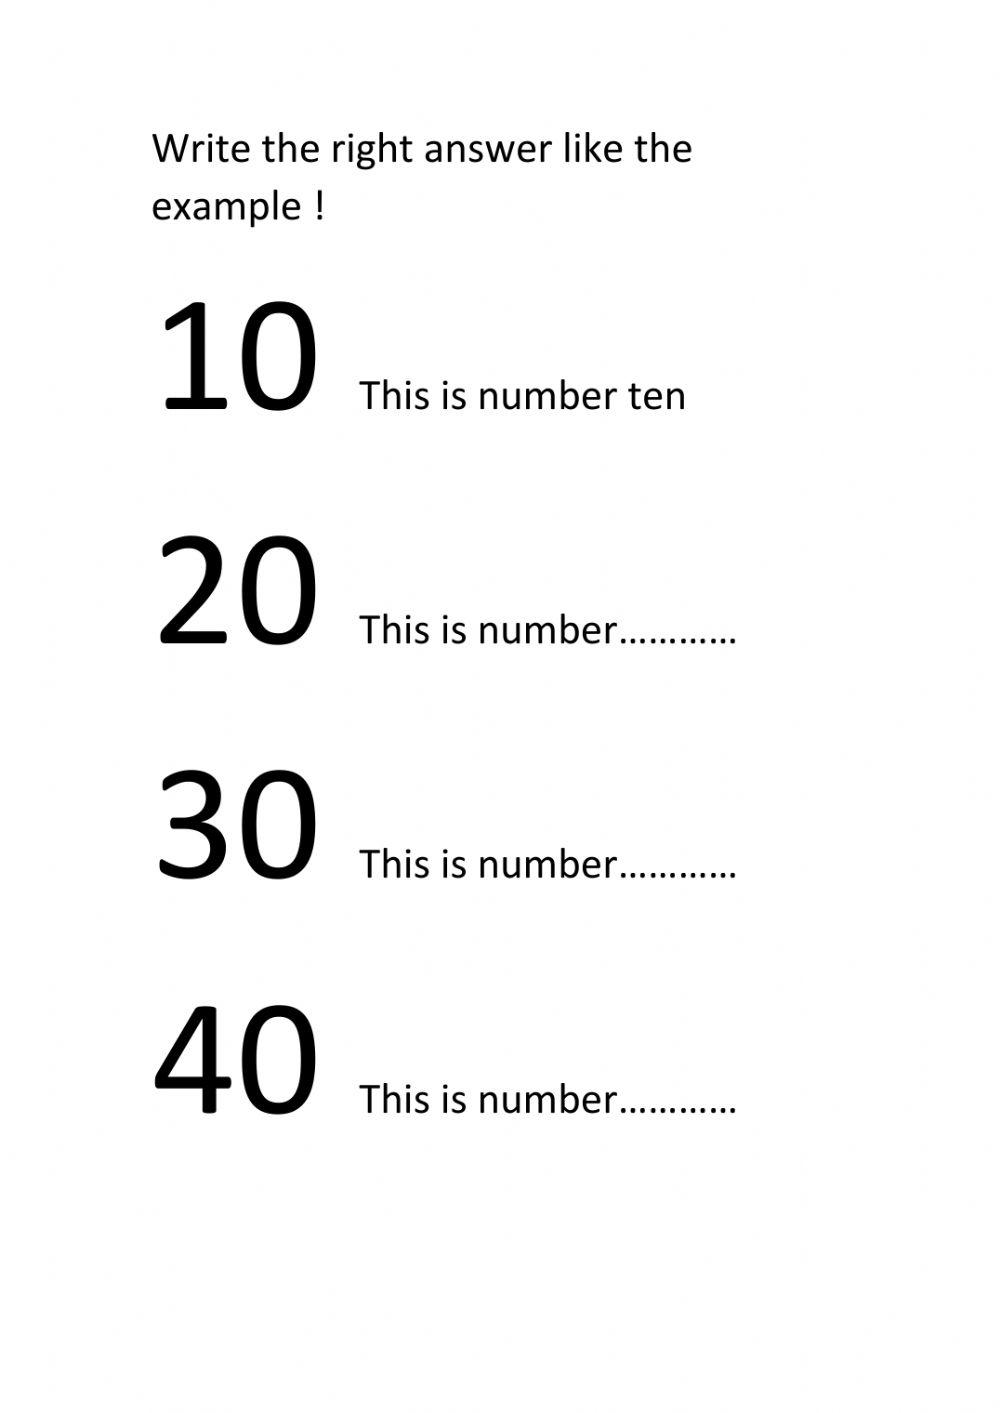 Write the number